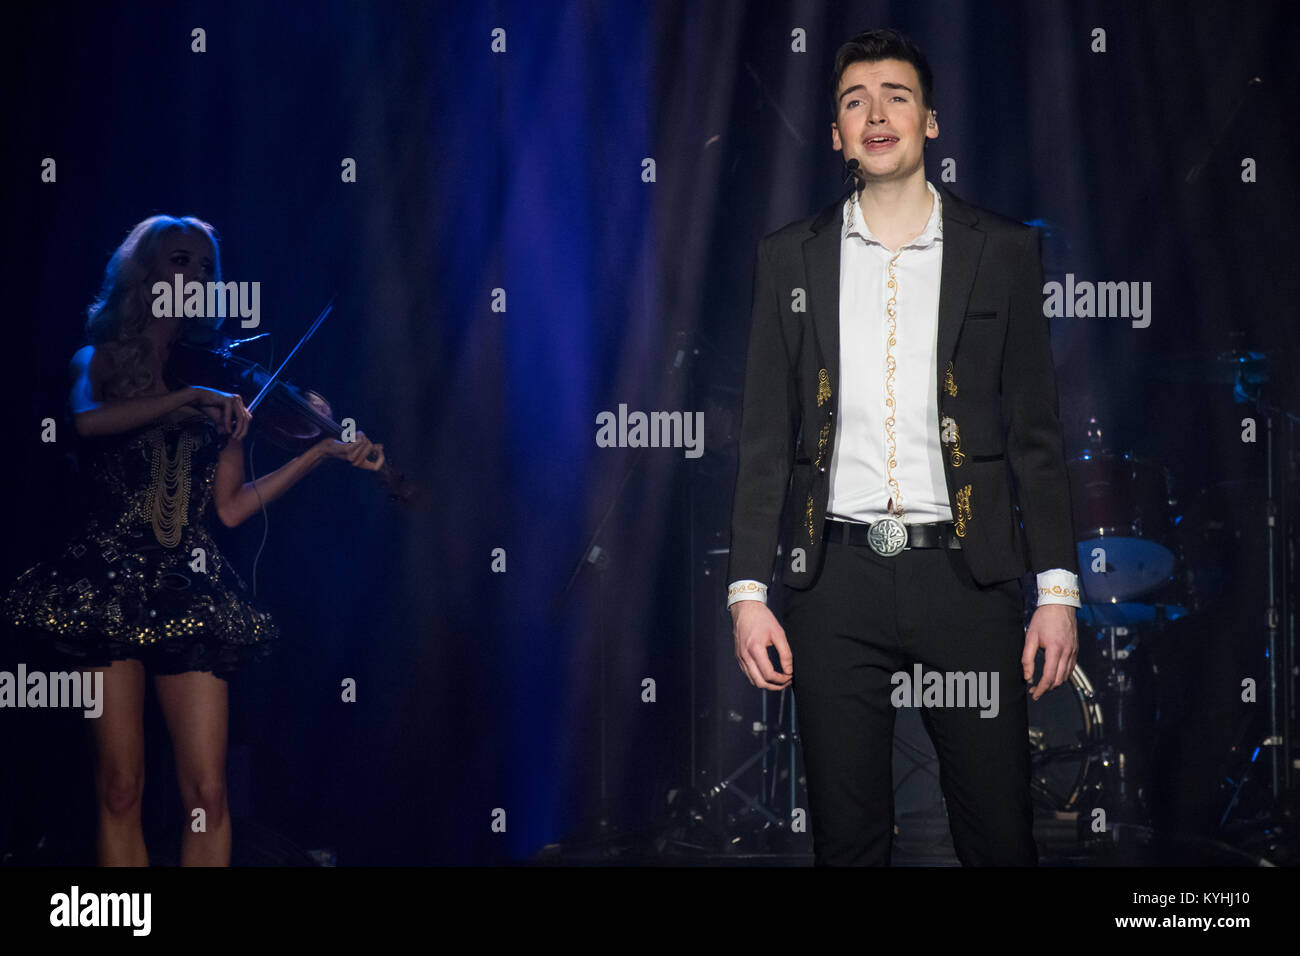 Dúlamán - Voice of the Celts, Irish dance and folk music show, produced by Seán McCarthy, Dúlamán was finalist of German TV talent show 'Das Supertalent 2017', here show at Stadthalle Wetzlar, Germany, 13th Jan, 2018. Scene with lead vocalist Seán Keany. Credit: Christian Lademann Stock Photo